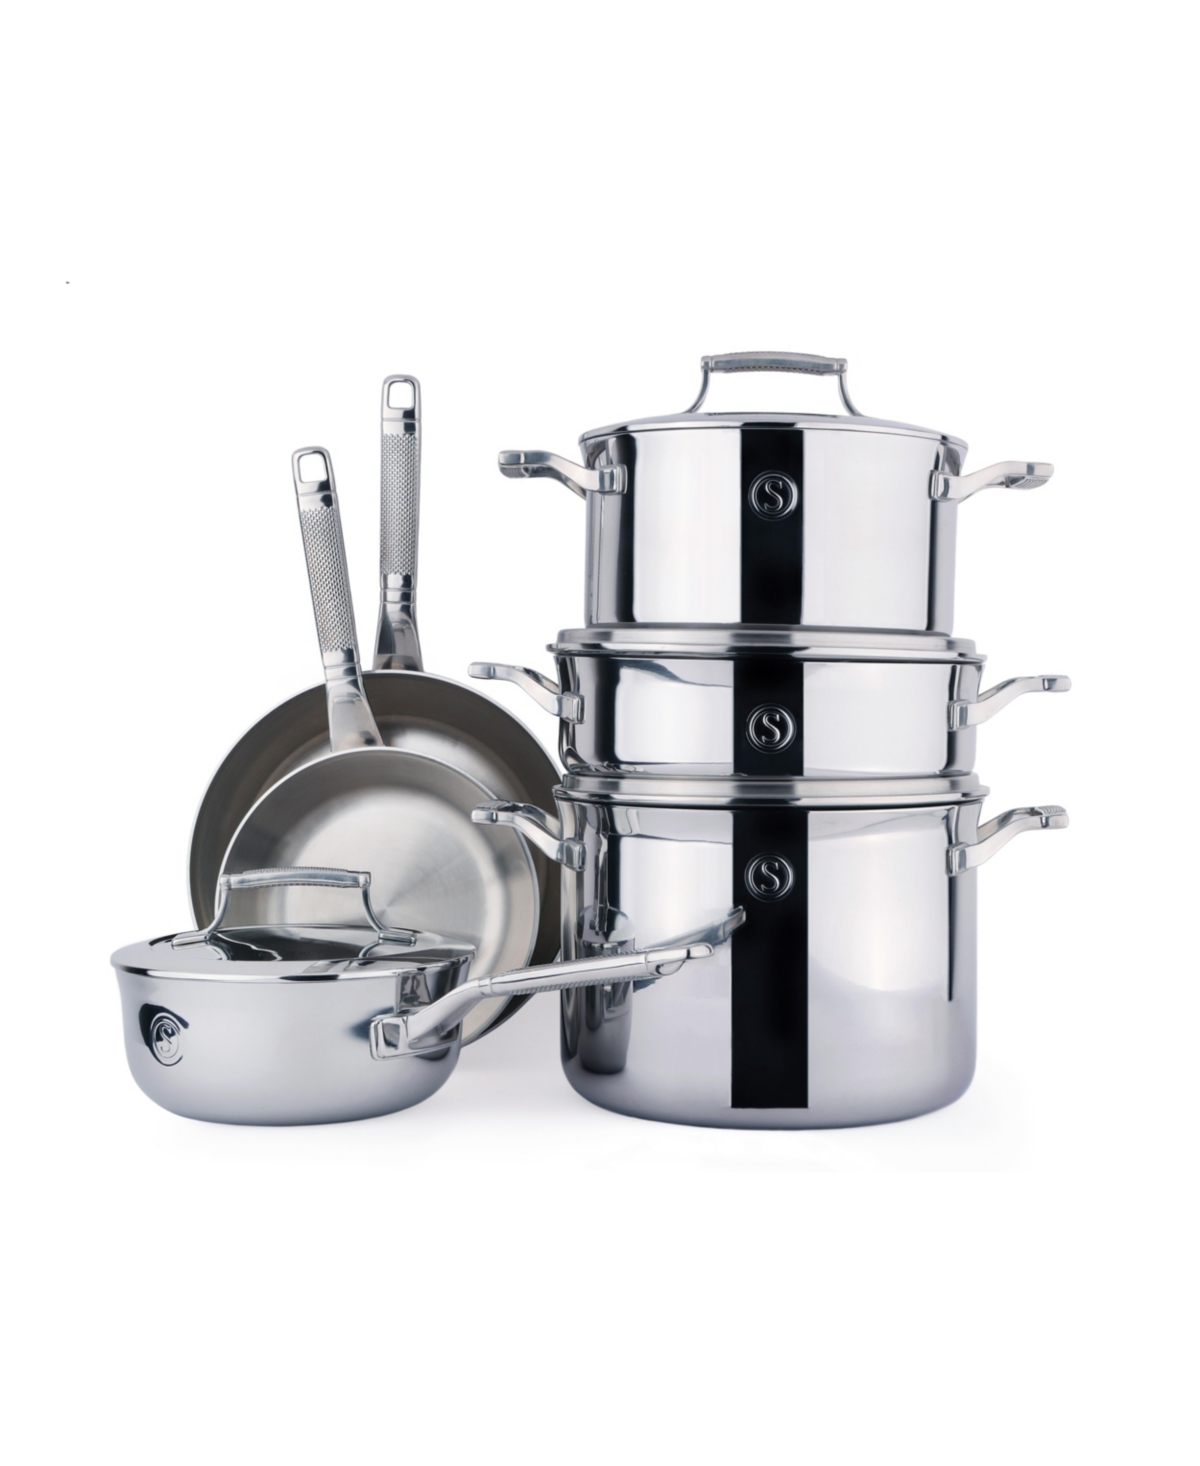 Saveur Selects Voyage Series Tri-ply Stainless Steel 10-pc. Cookware Set In Silver